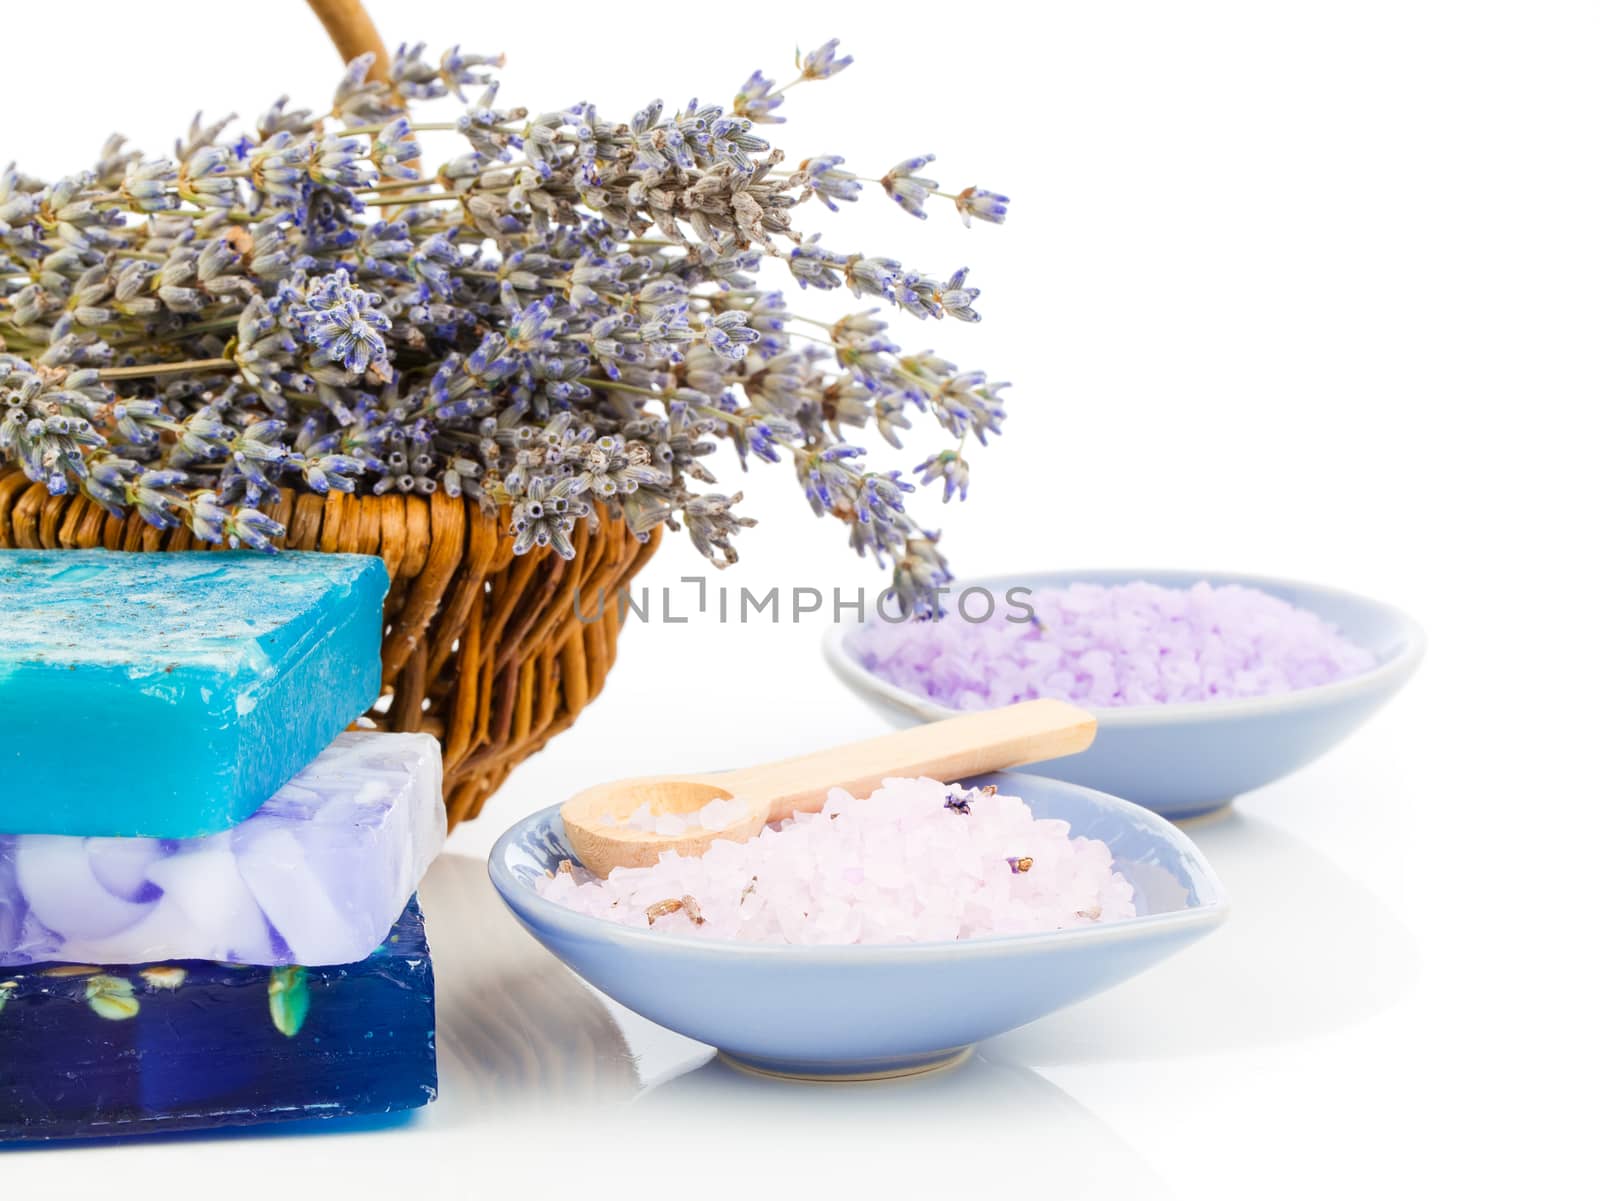 Spa still life with lavender flowers and bath salt, on white background